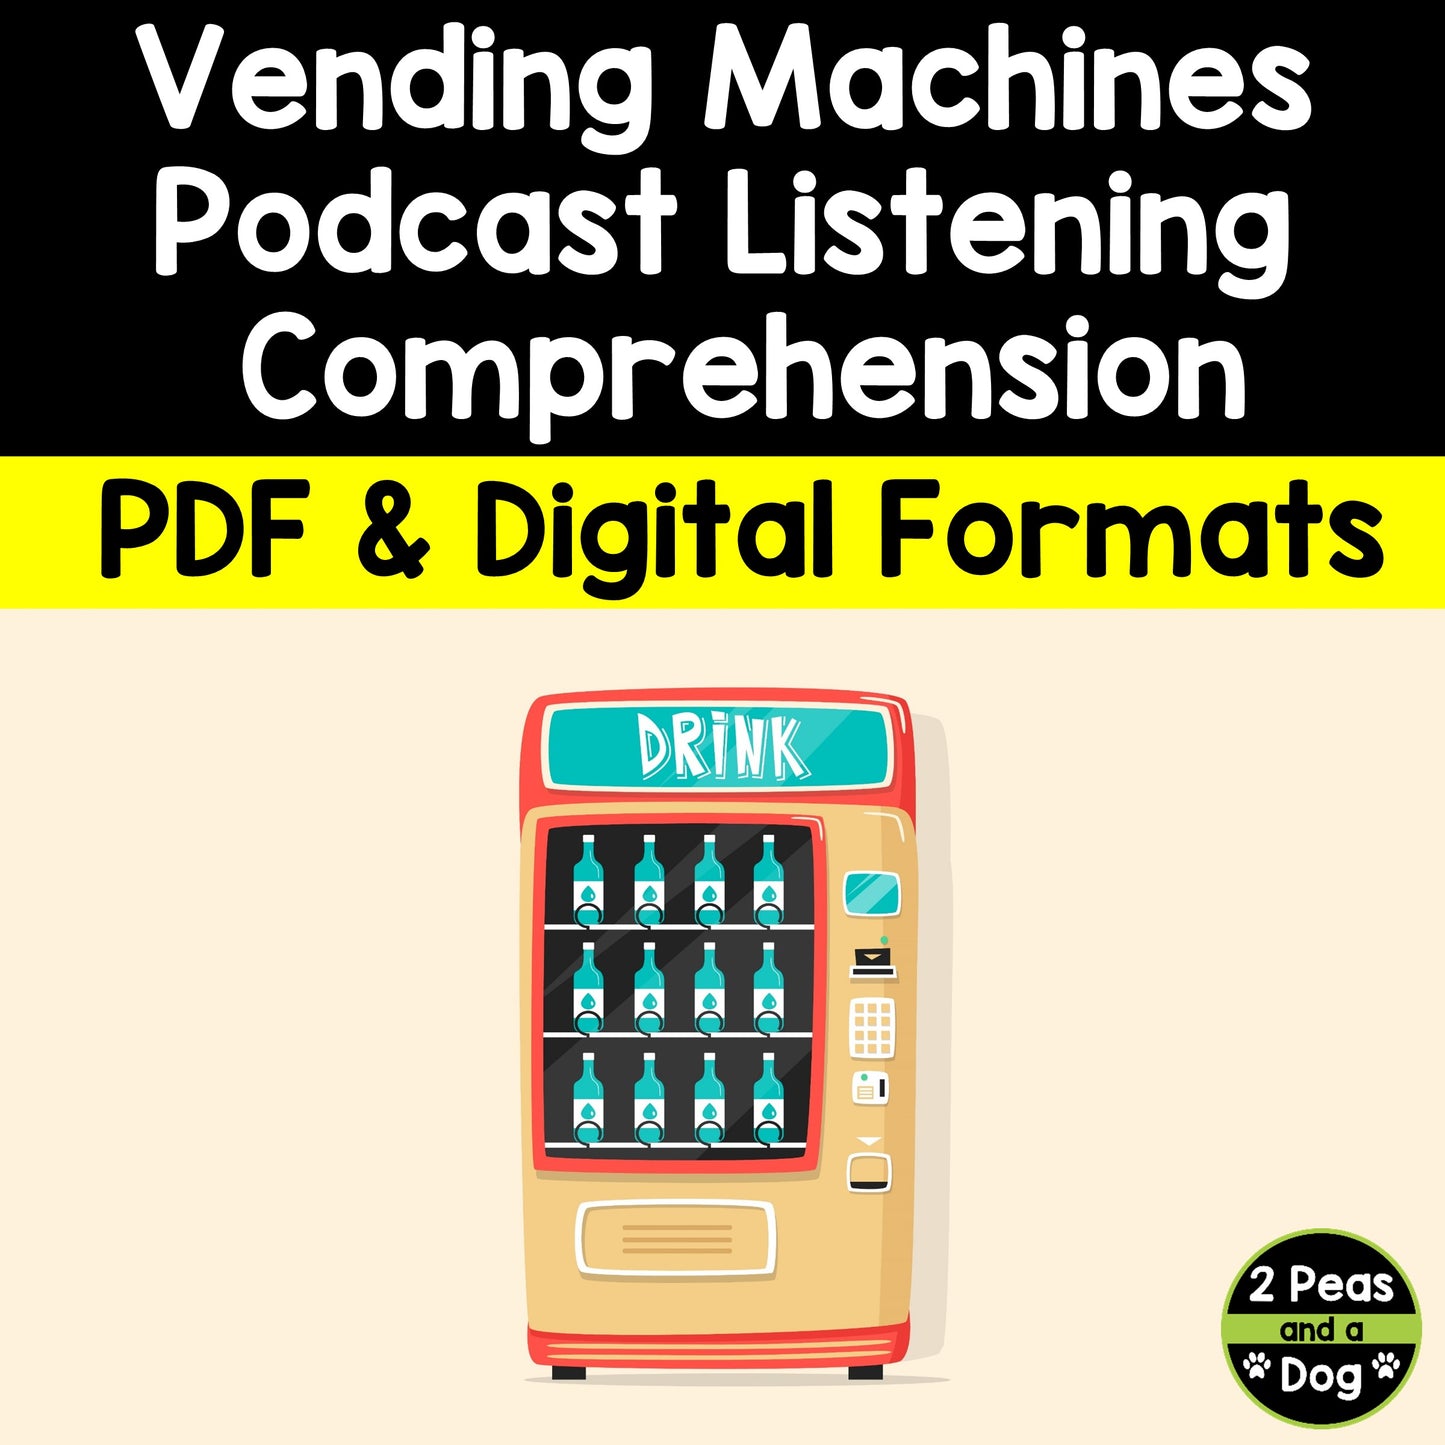 Podcast Listening Comprehension Lesson - Vending Machines